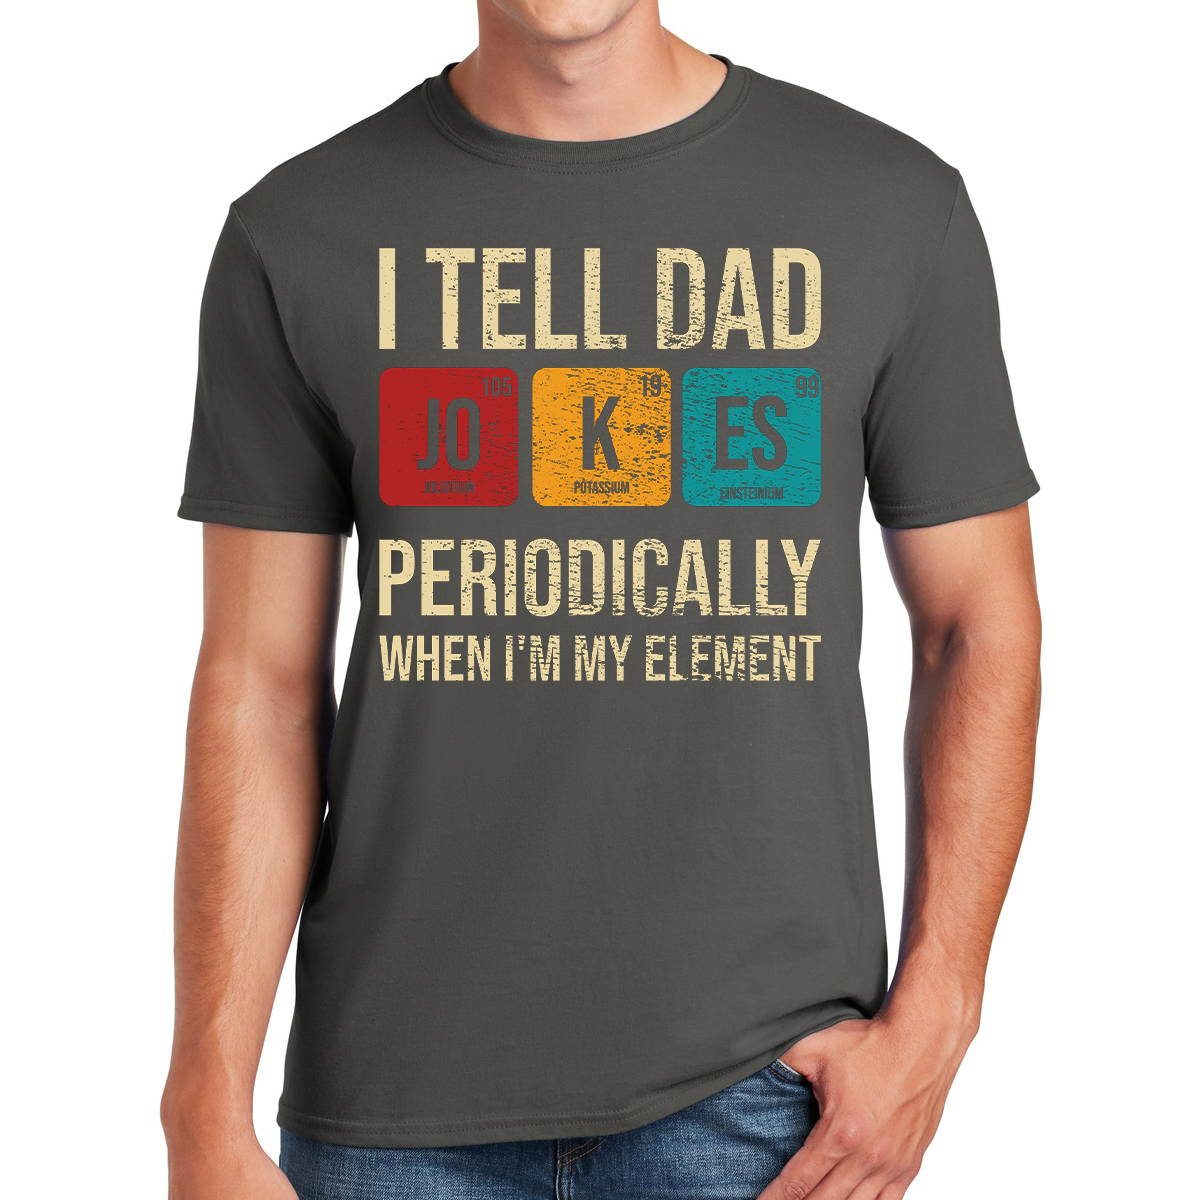 I Tell Dad Jokes Periodically But Only When I'm In My Element Funny Dad T-shirt